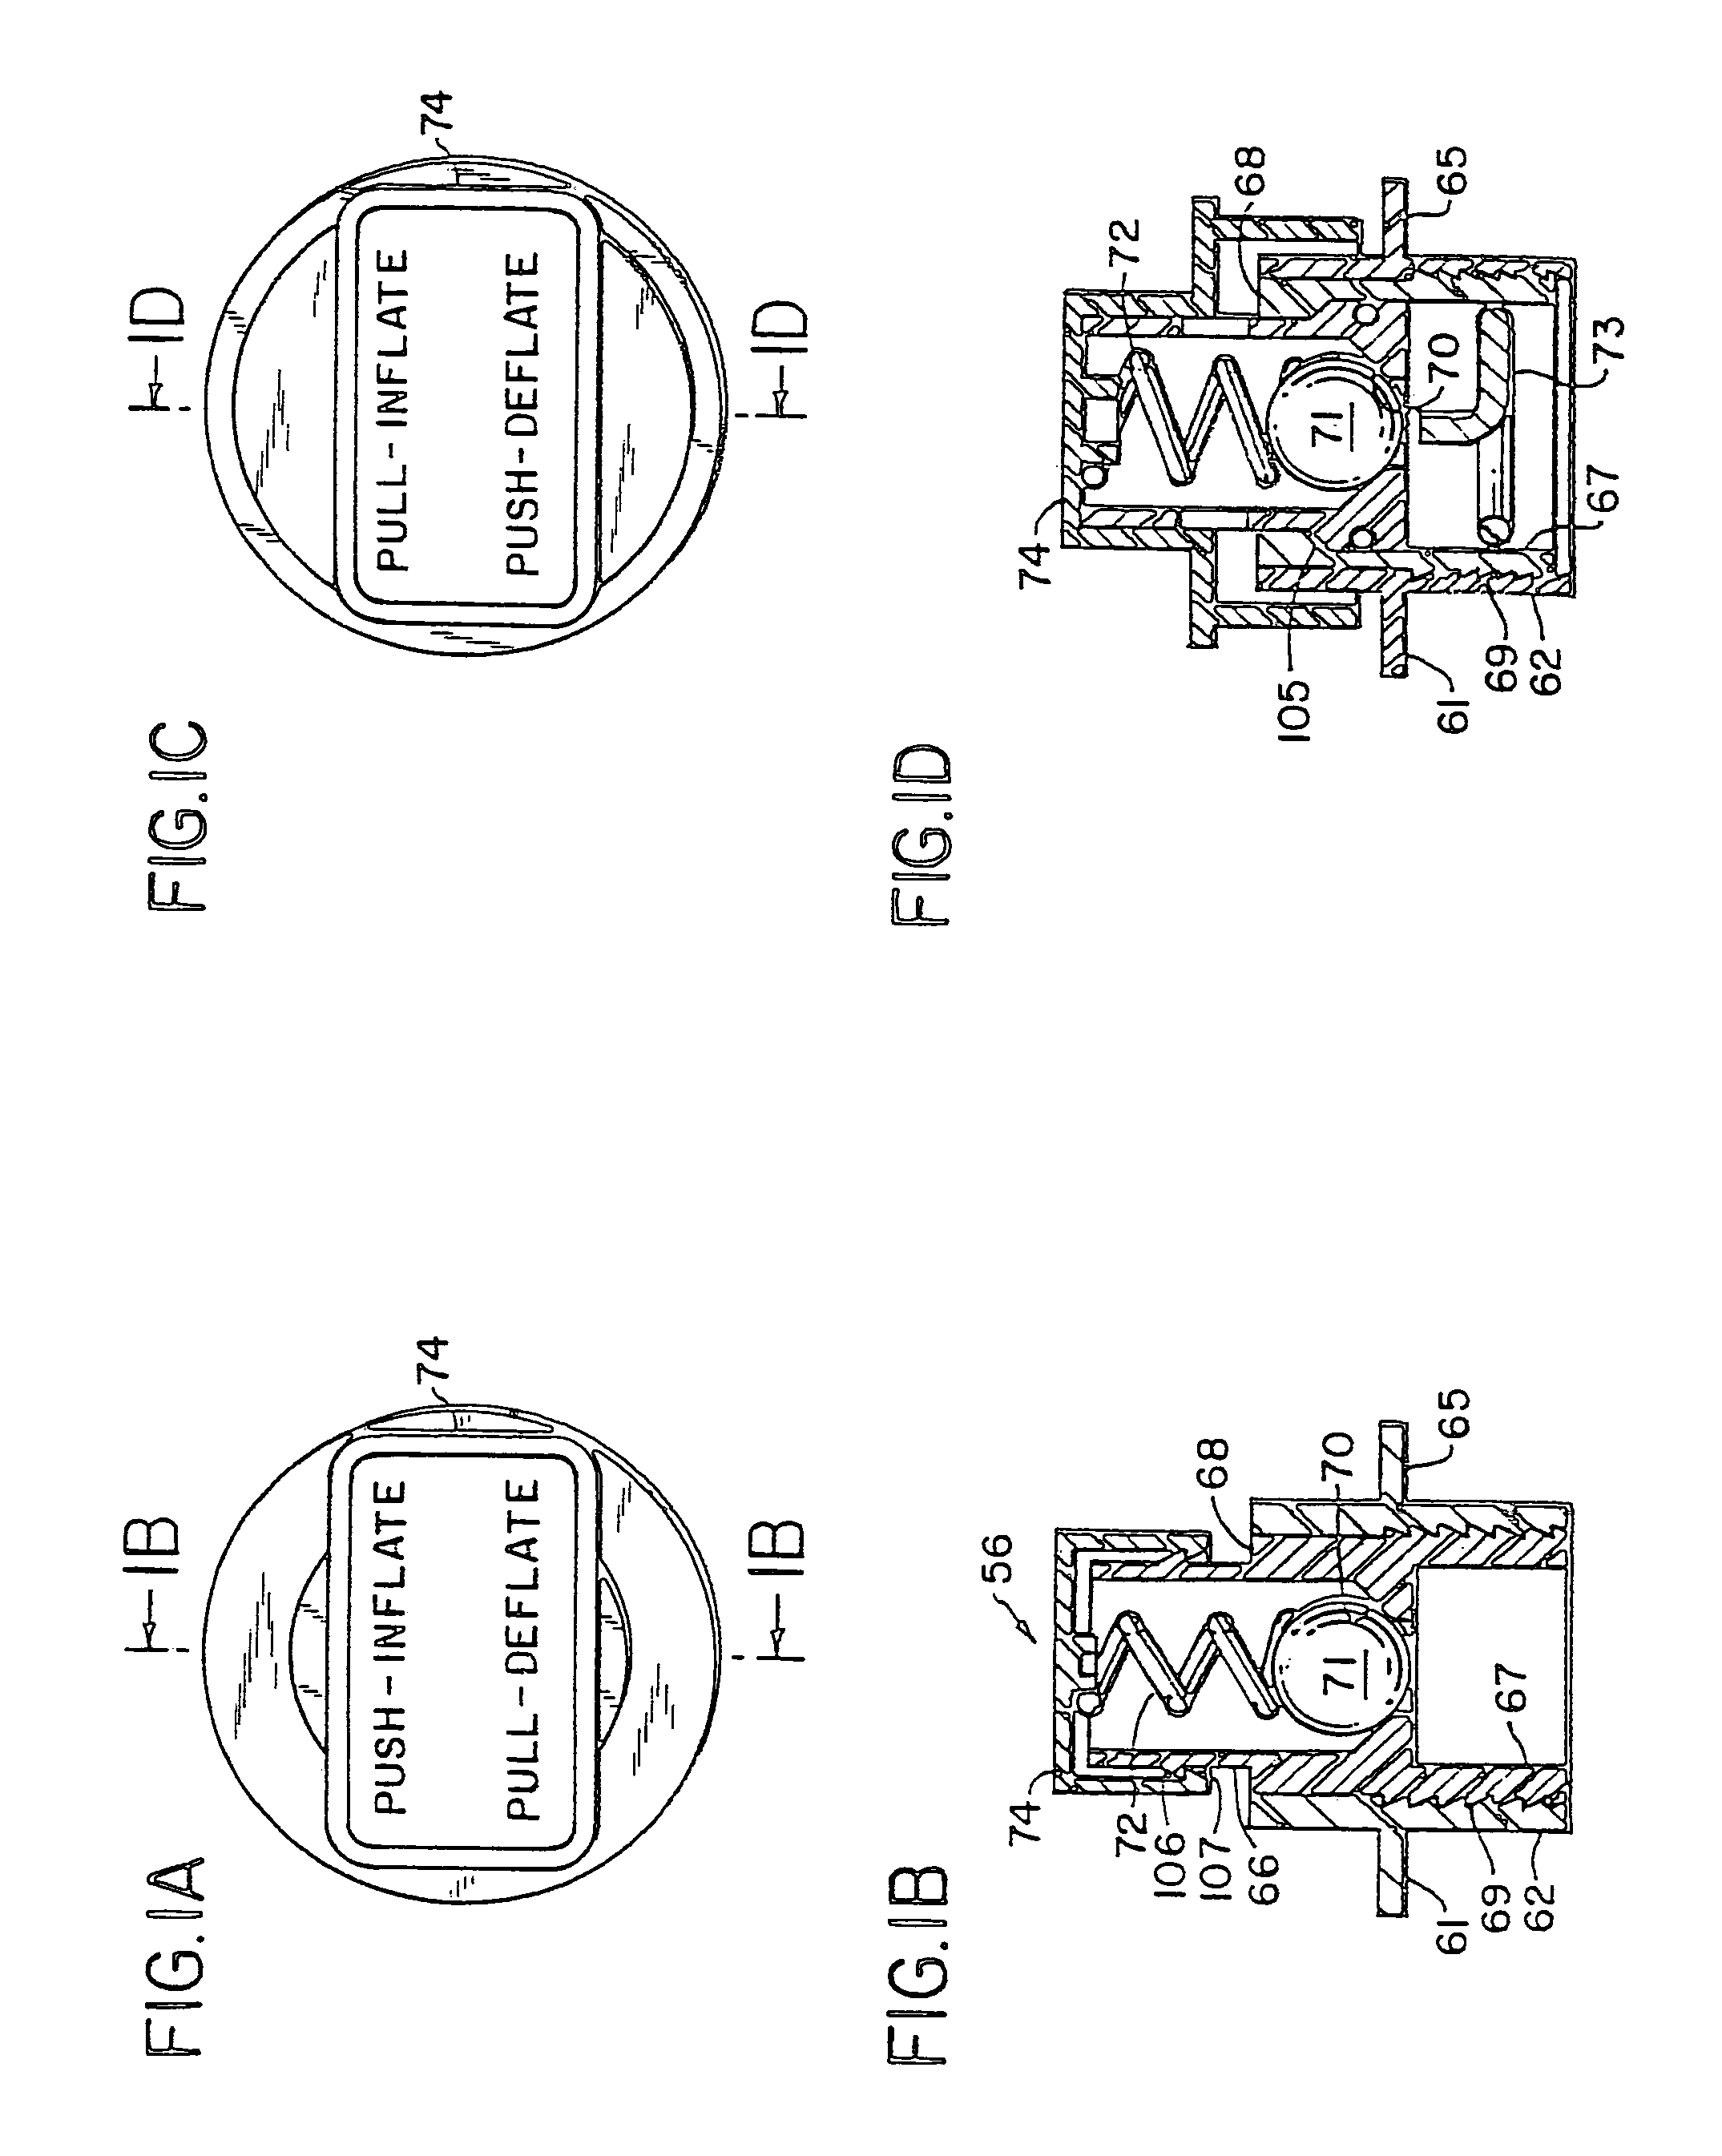 Ergonomic systems and methods providing intelligent adaptive surfaces and temperature control